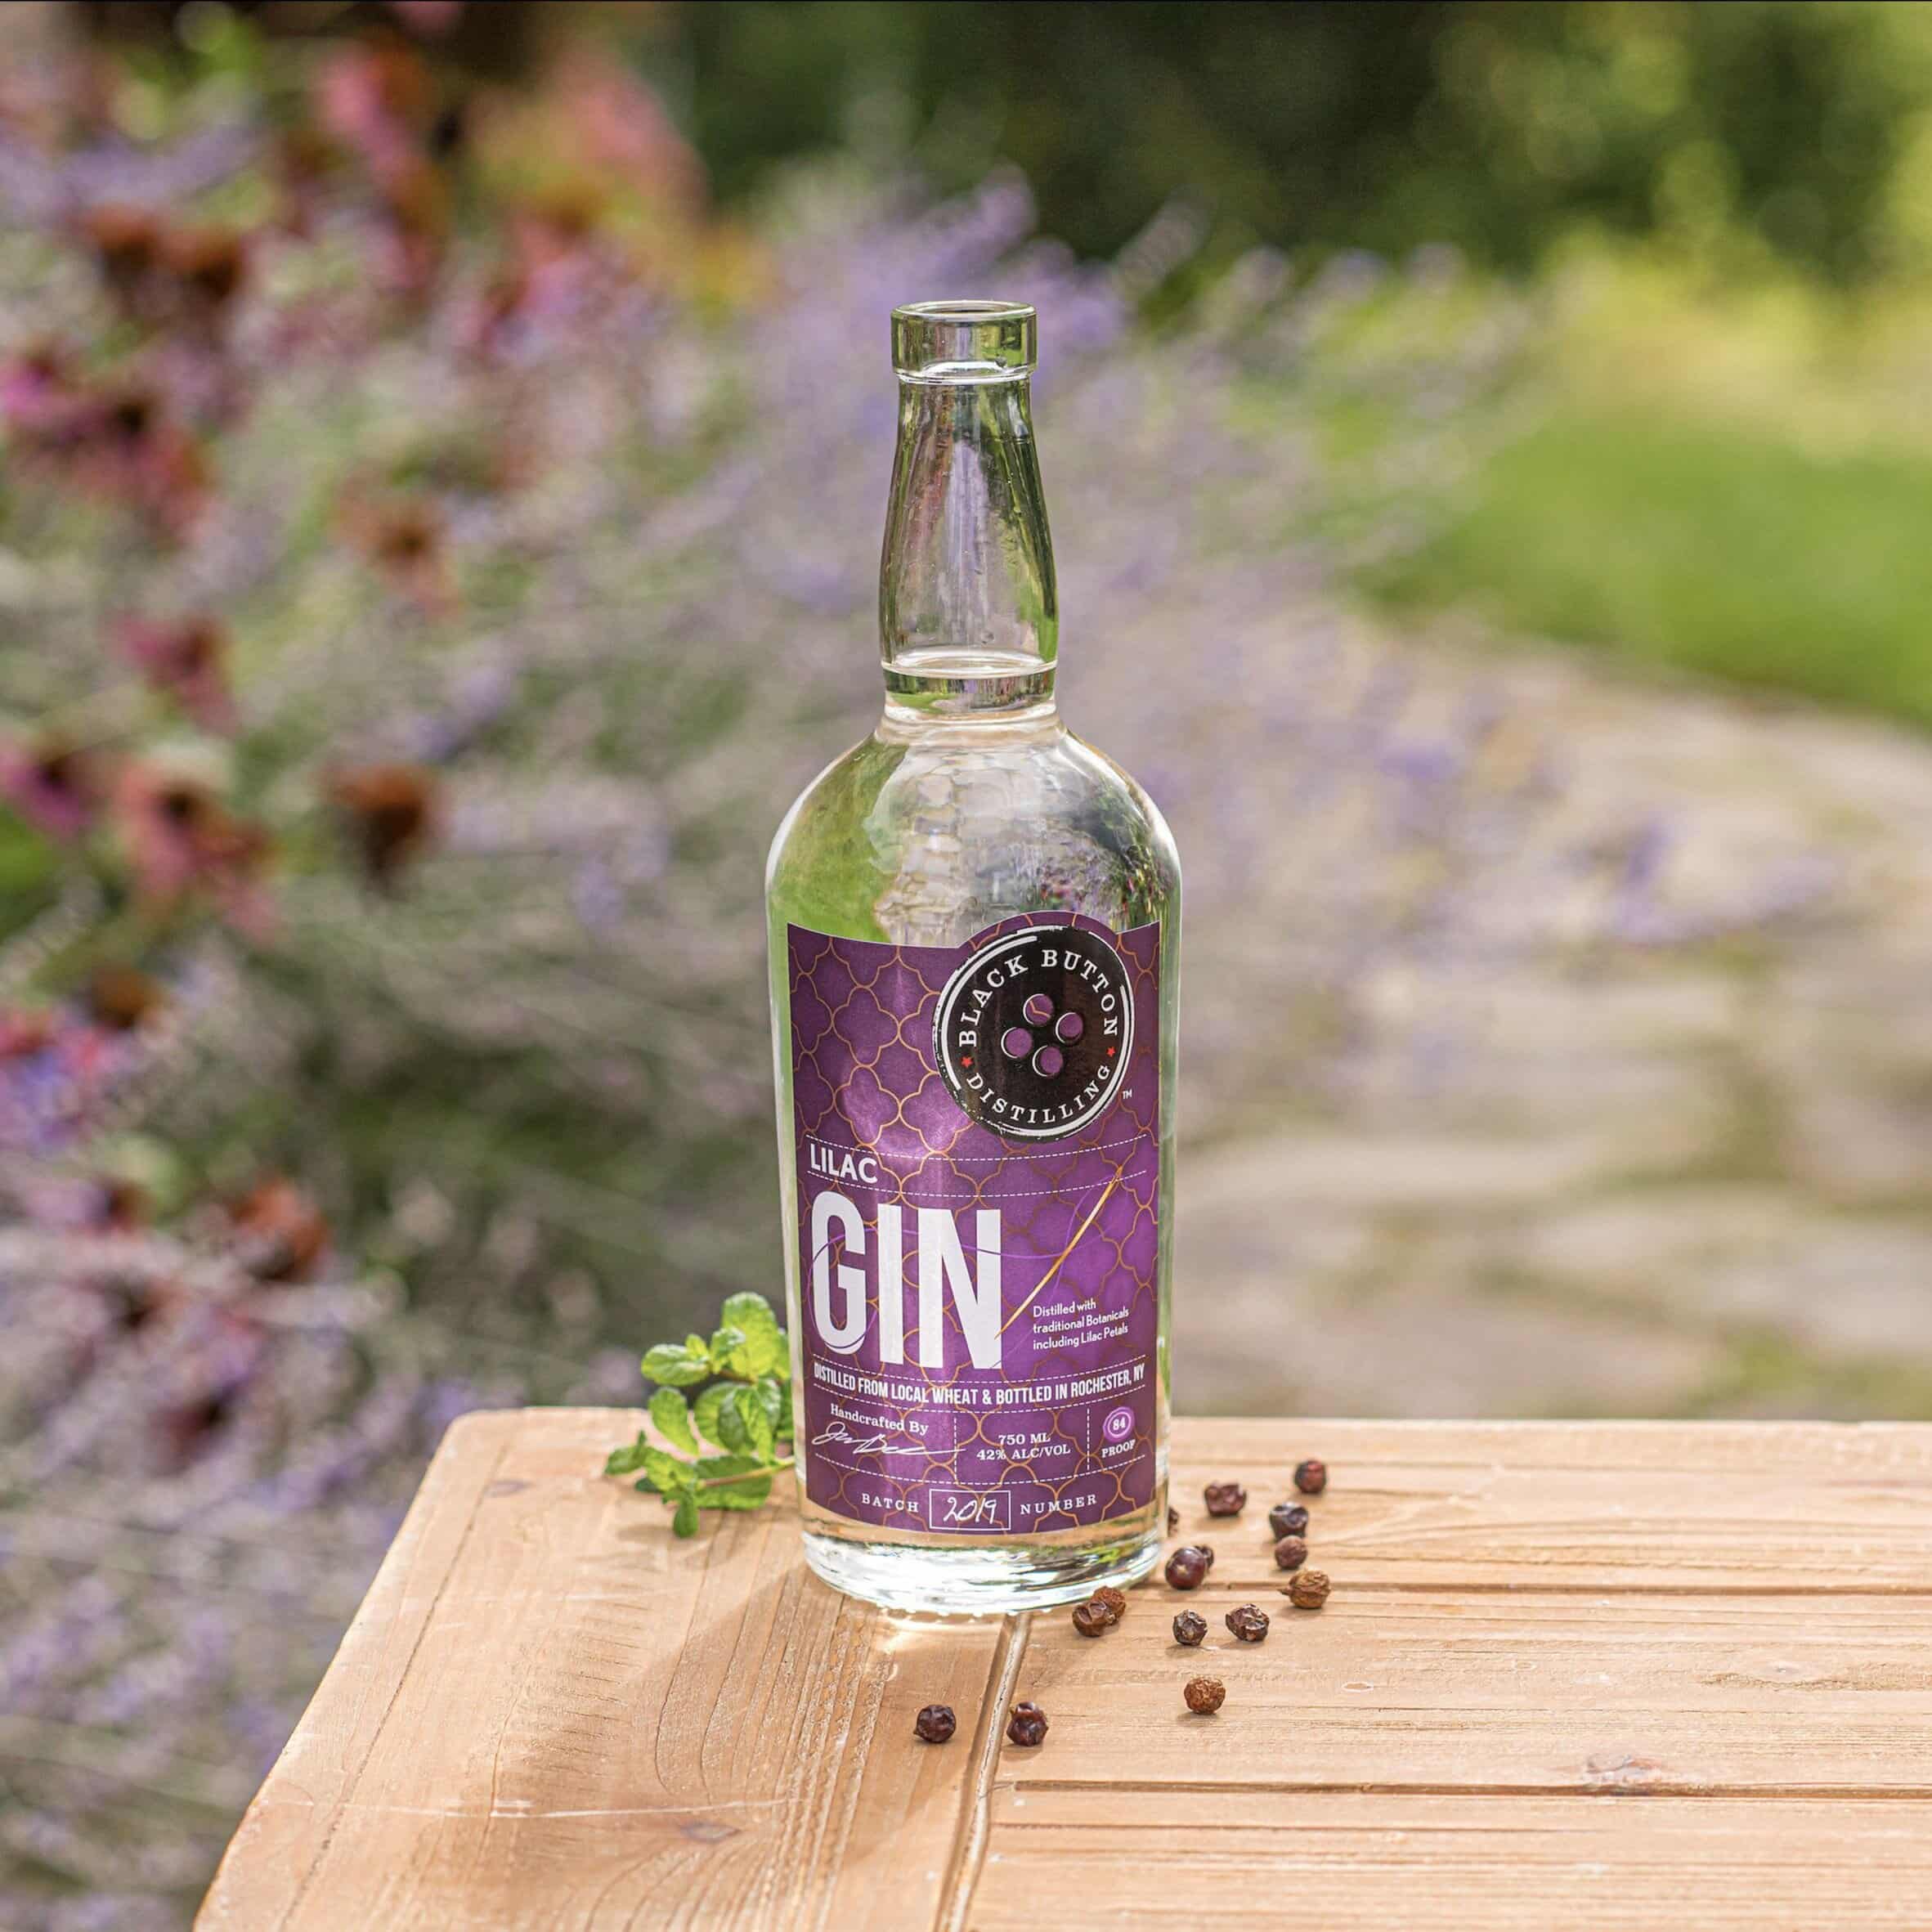 BLACK BUTTON DISTILLING TO RELEASE LIMITED EDITION LILAC GIN ON MAY 29